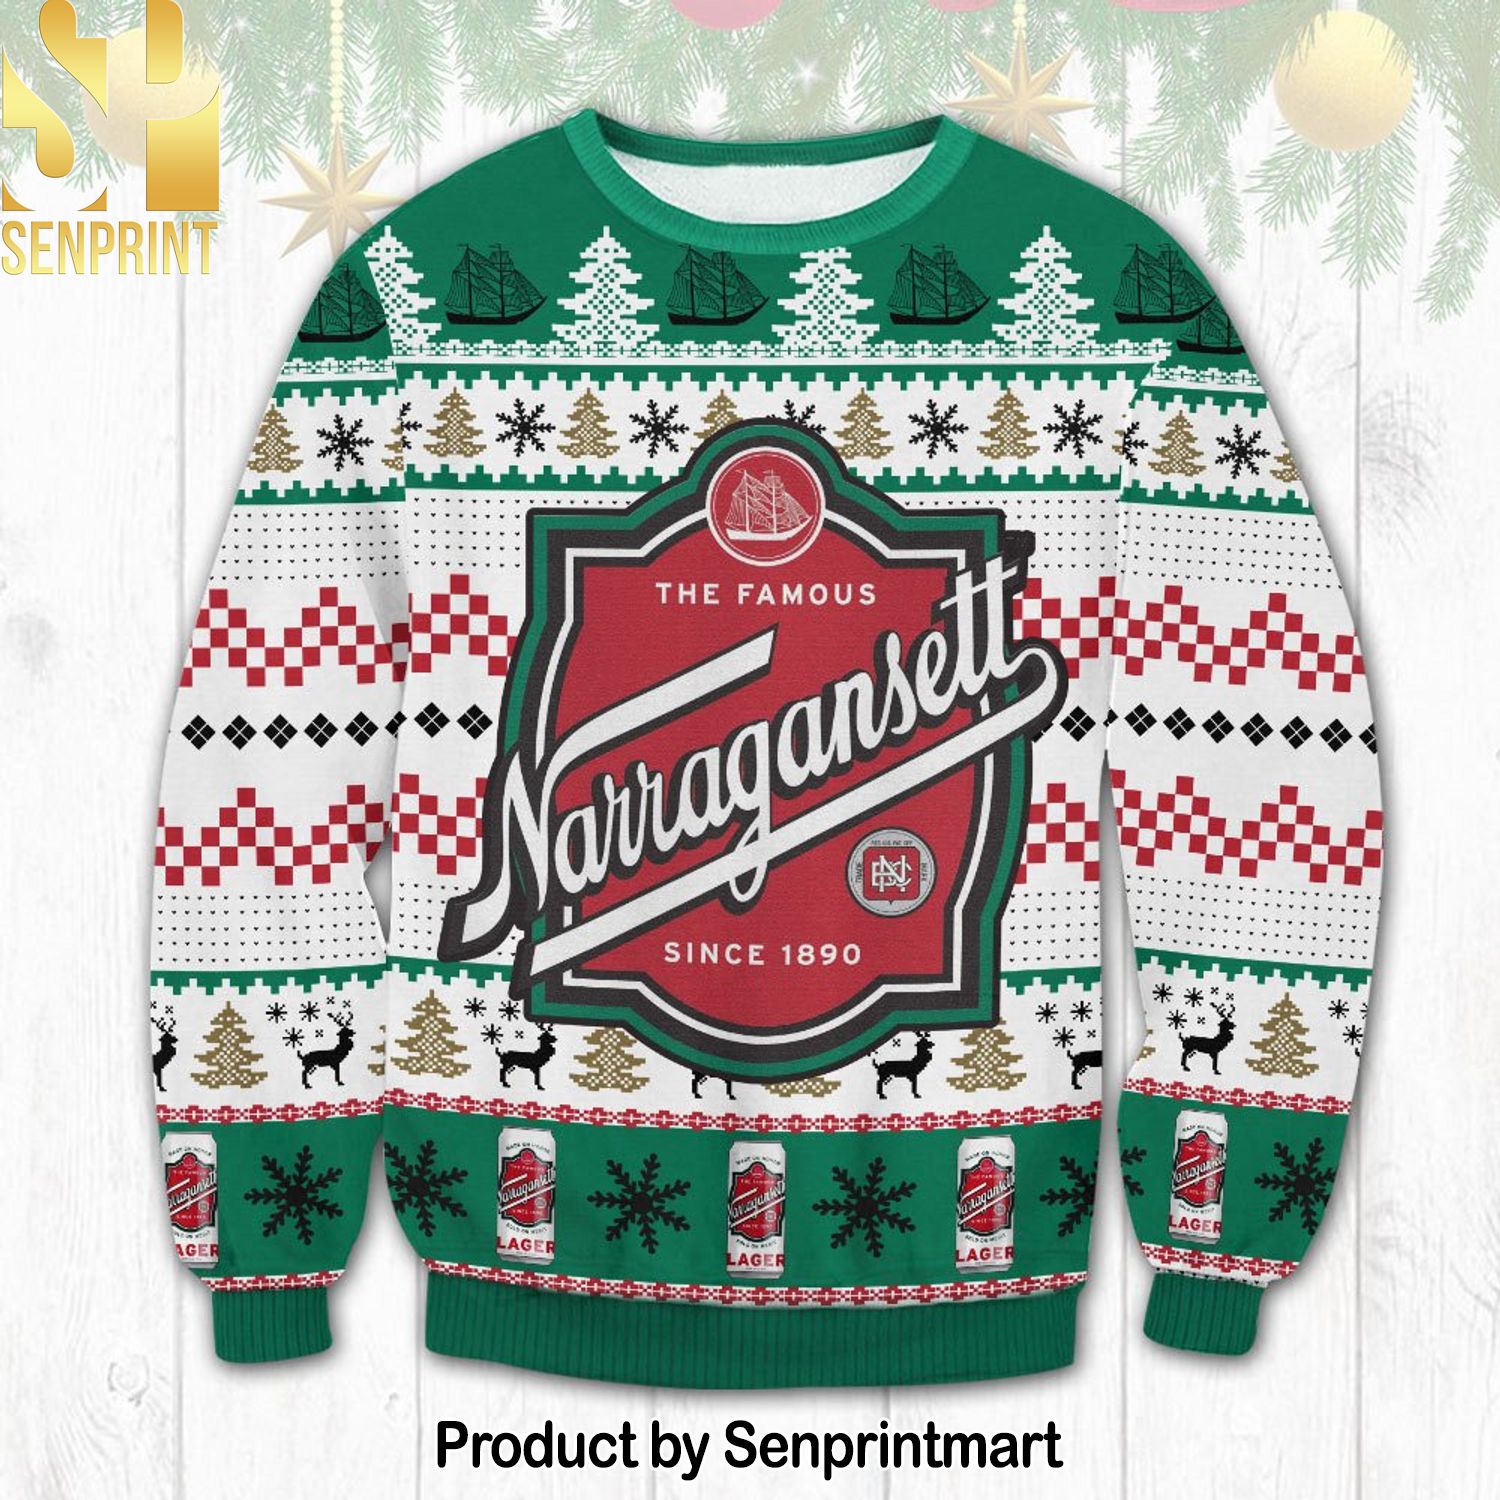 Narragansett Beer For Christmas Gifts Ugly Christmas Holiday Sweater